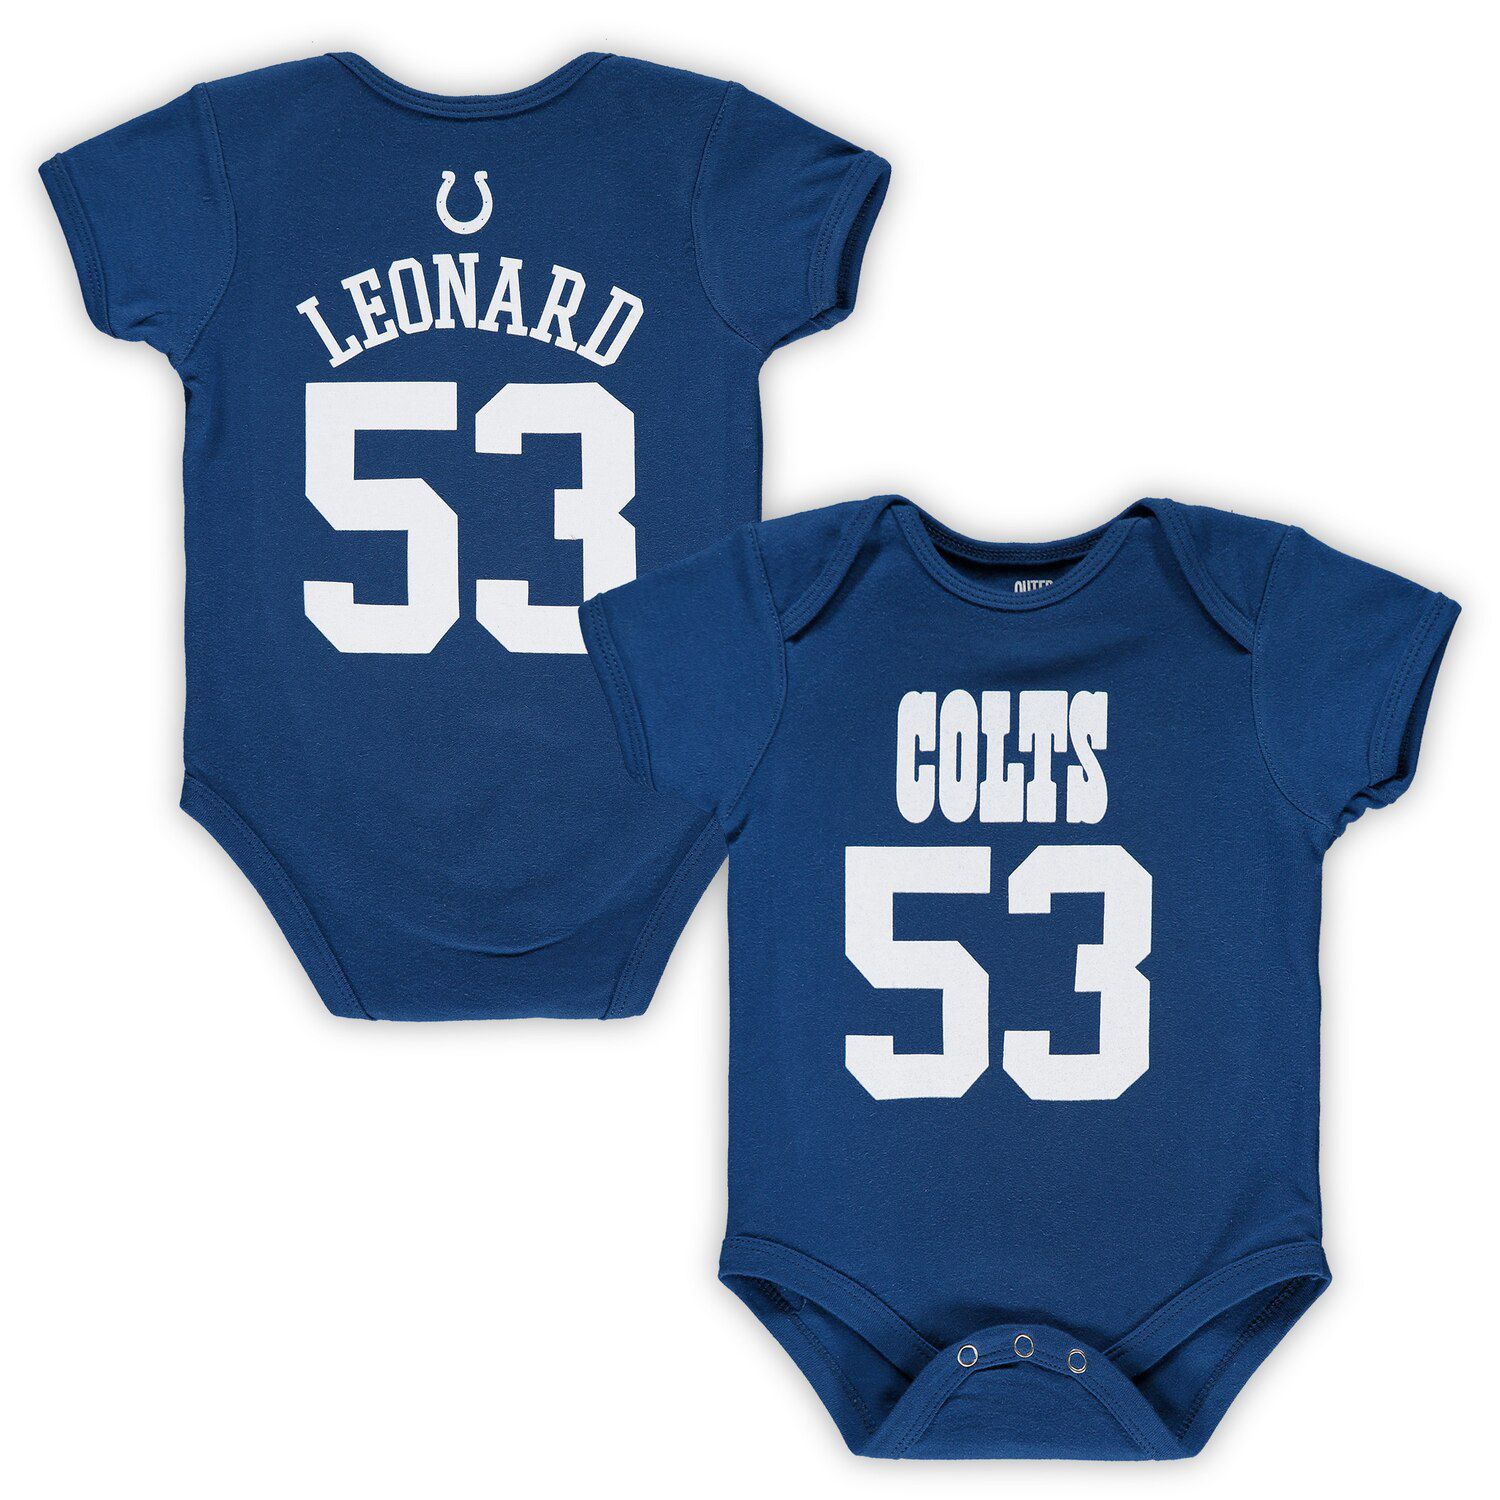 indianapolis colts infant